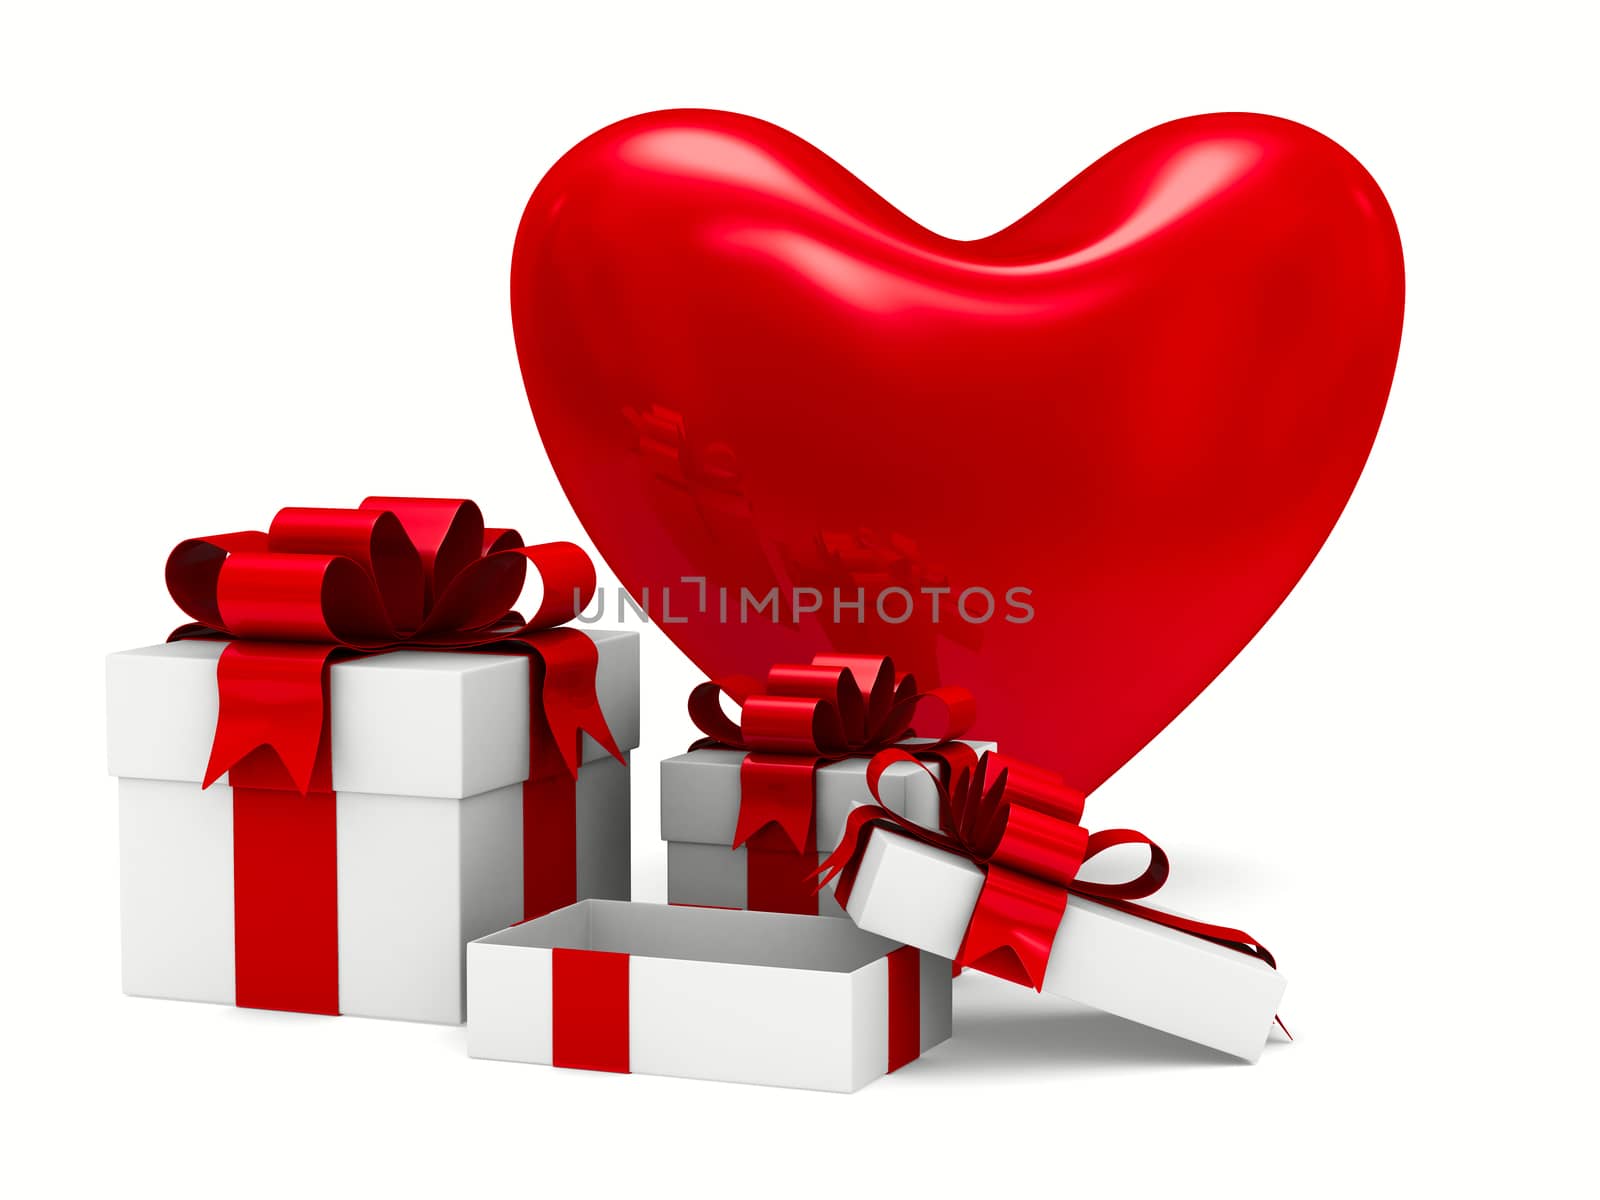 Heart and gift box on white background. Isolated 3D image